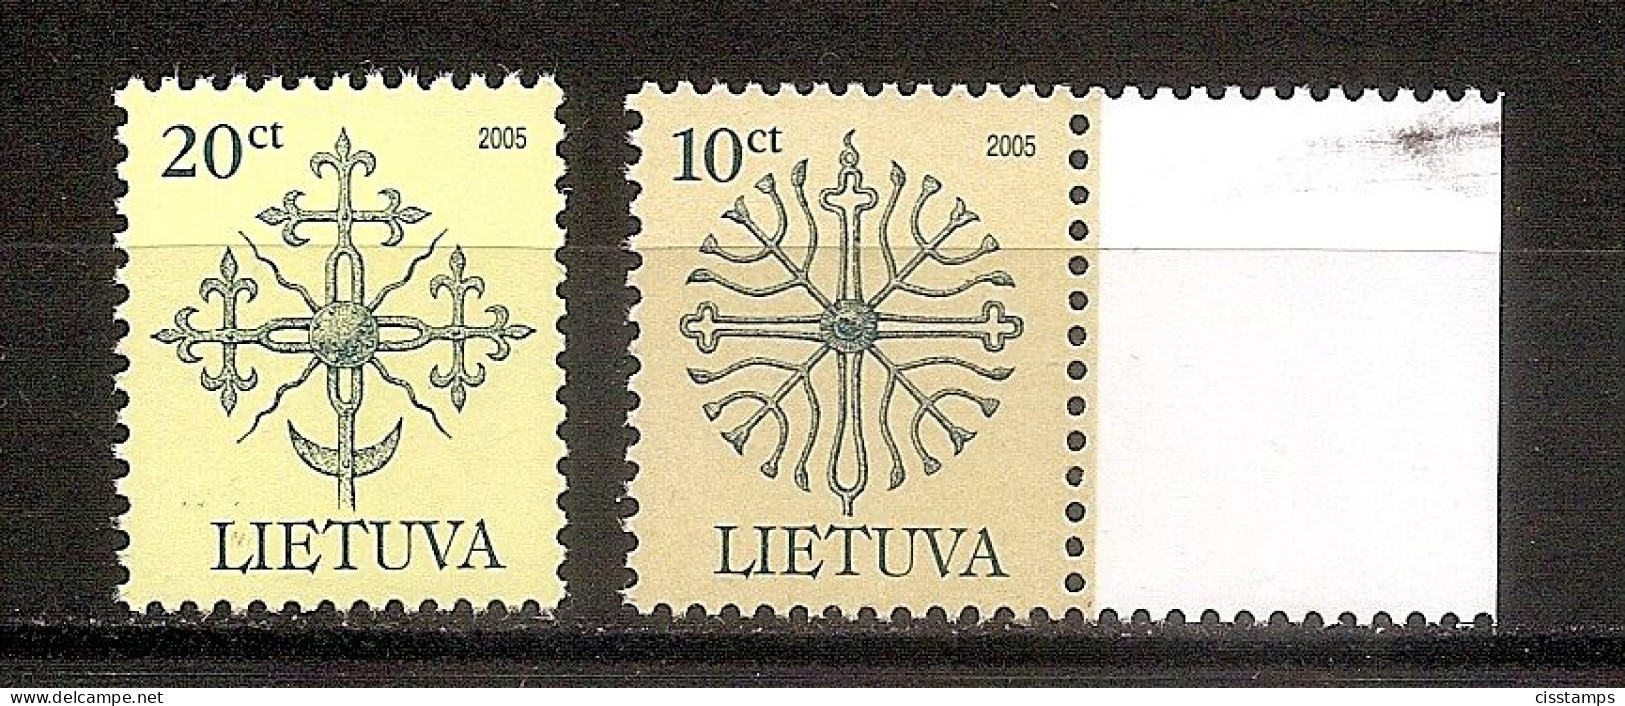 LITHUANIA 2005-10-08●Definitive●Forged Tops Of Monuments●Perf.13x121/2●Size 20x24●Mi 889I-90I●MNH - Litauen